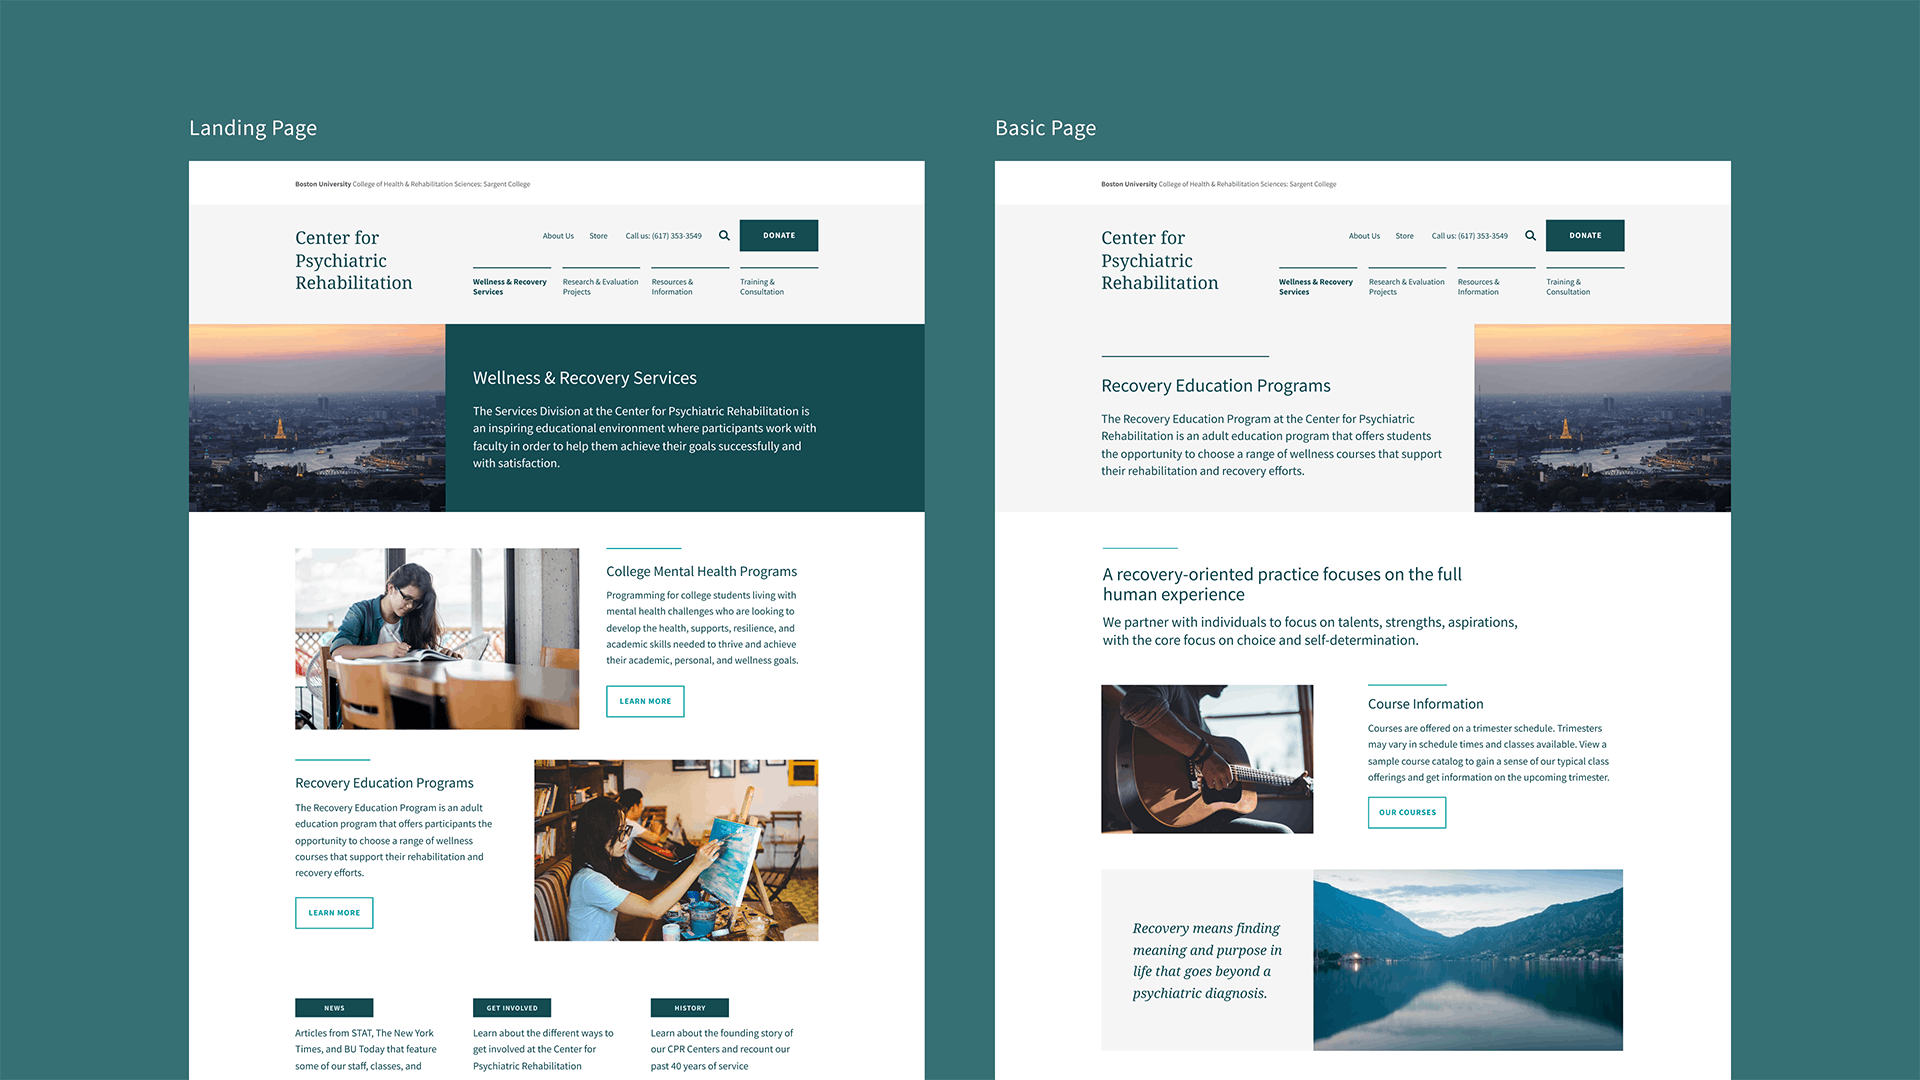 An example of a landing page next to a basic tertiary page.